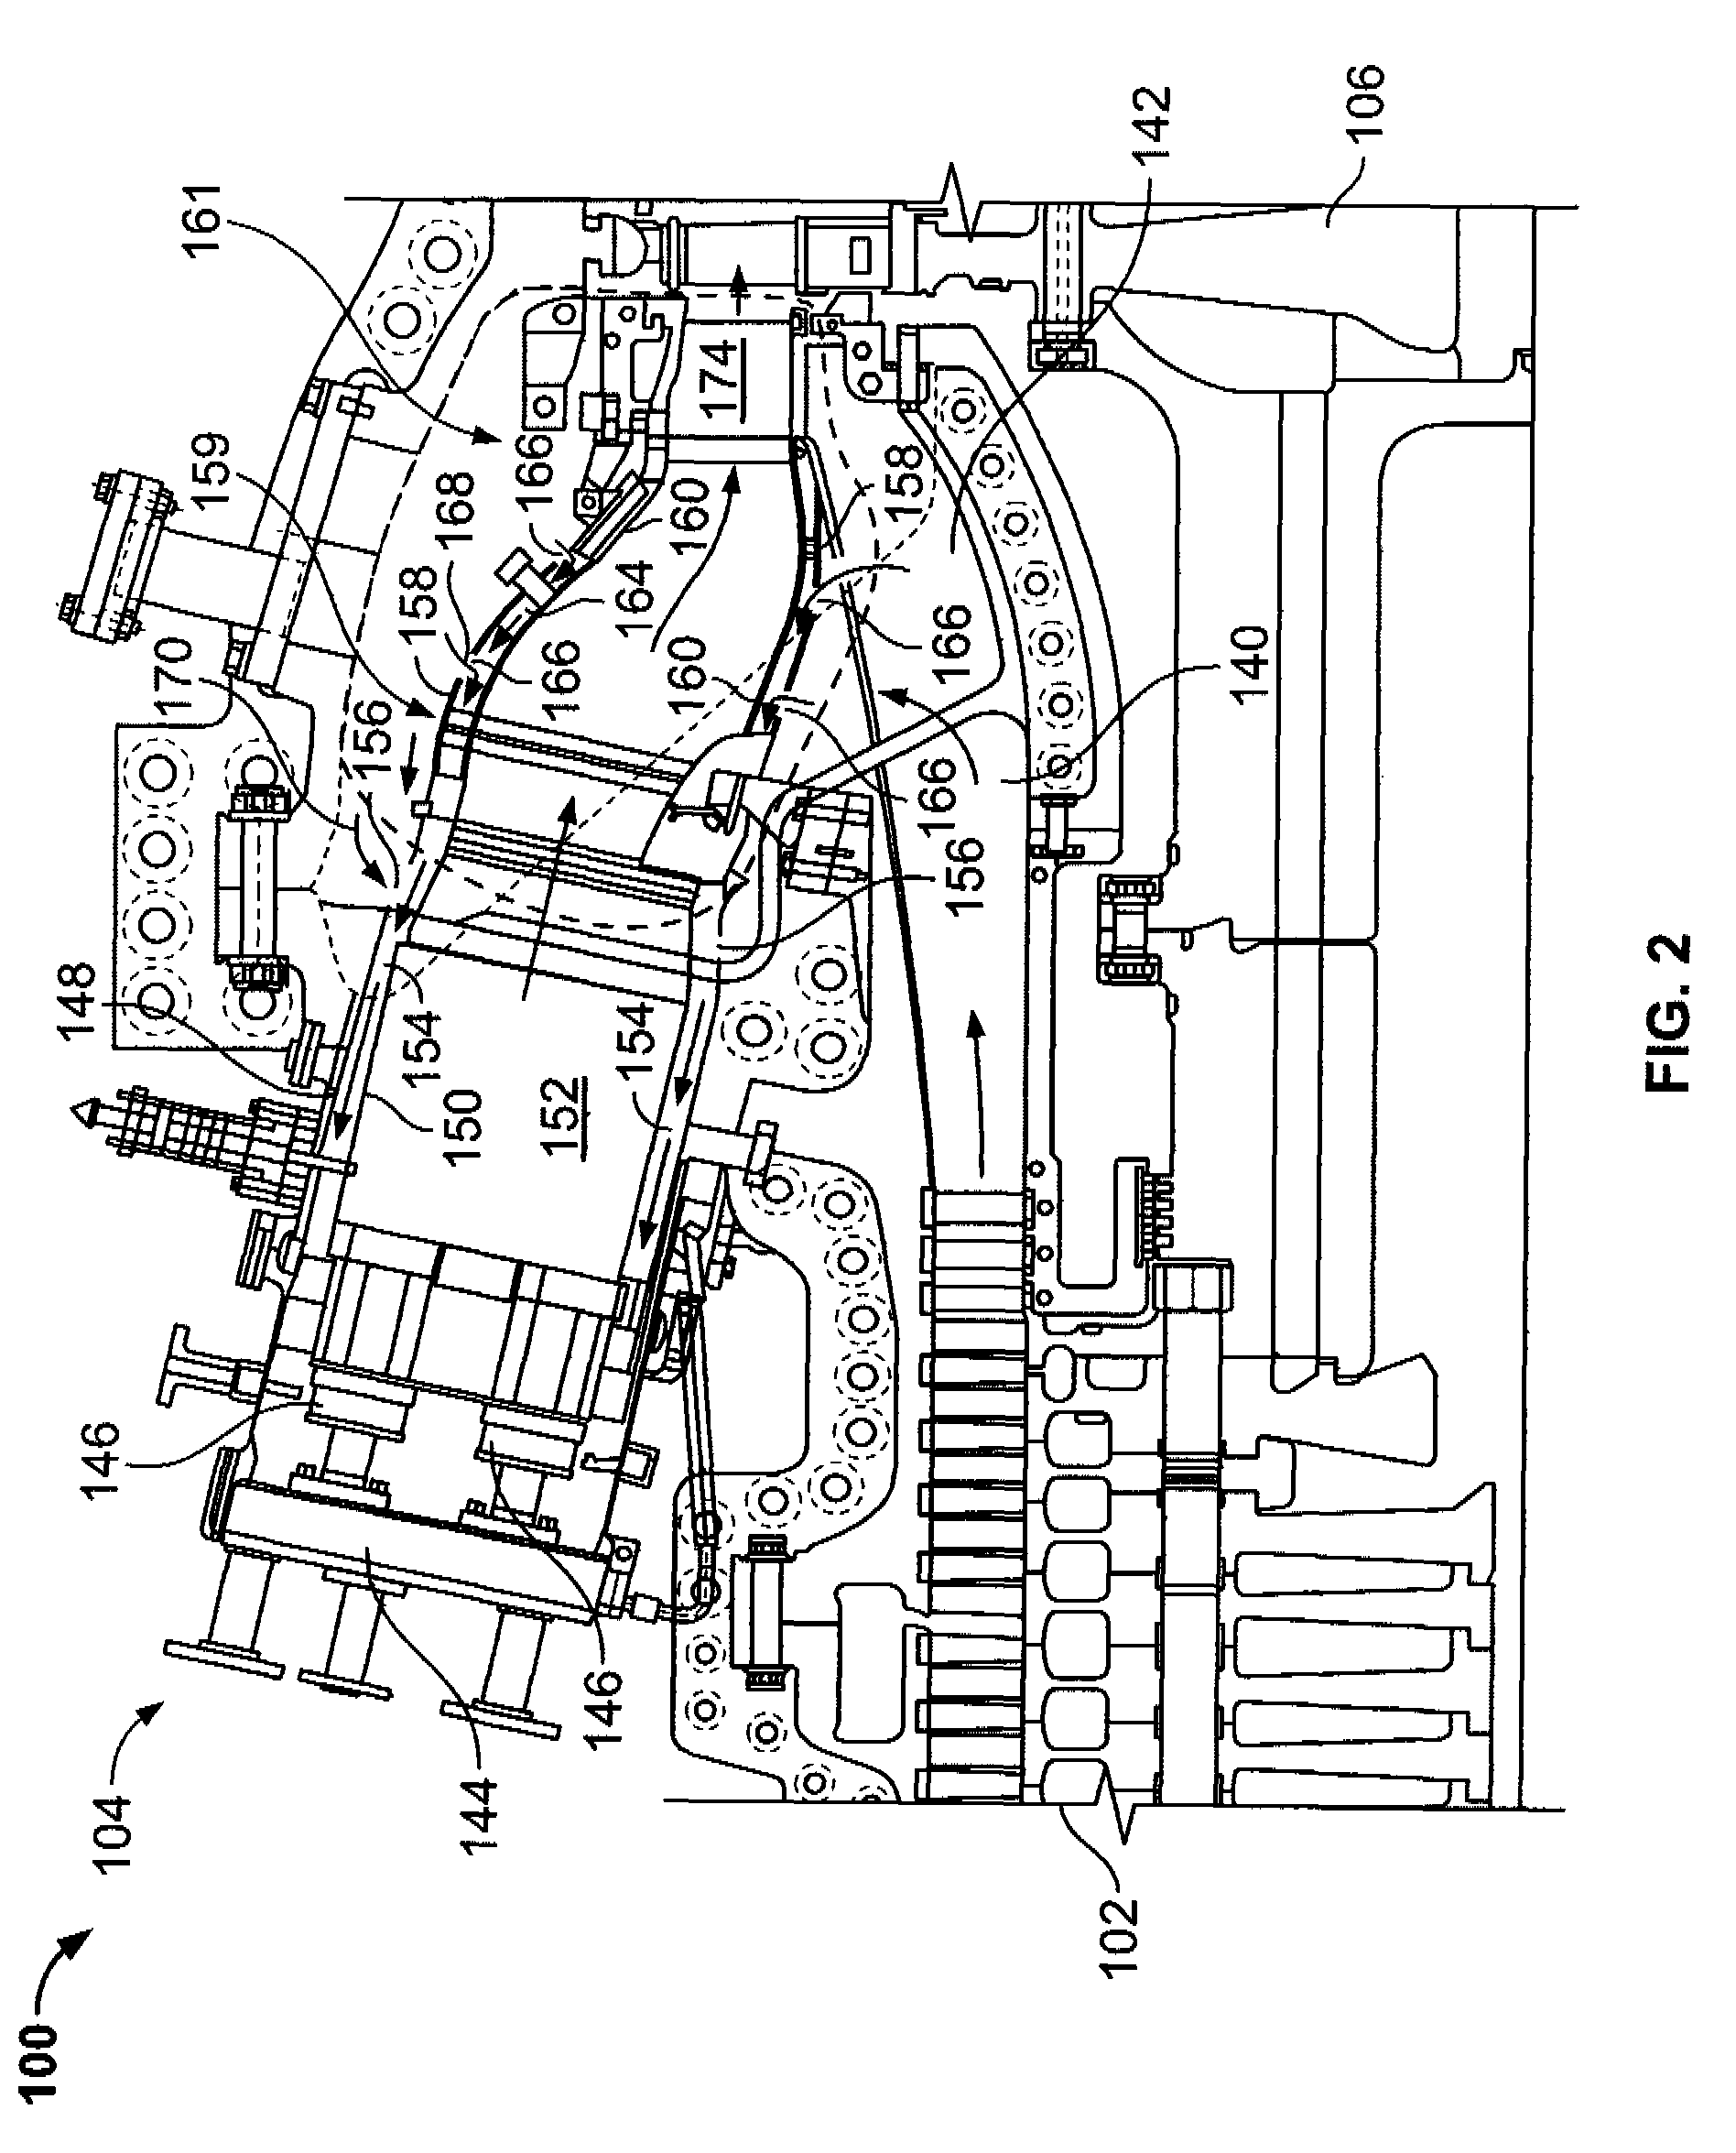 Method and apparatus to facilitate cooling turbine engines